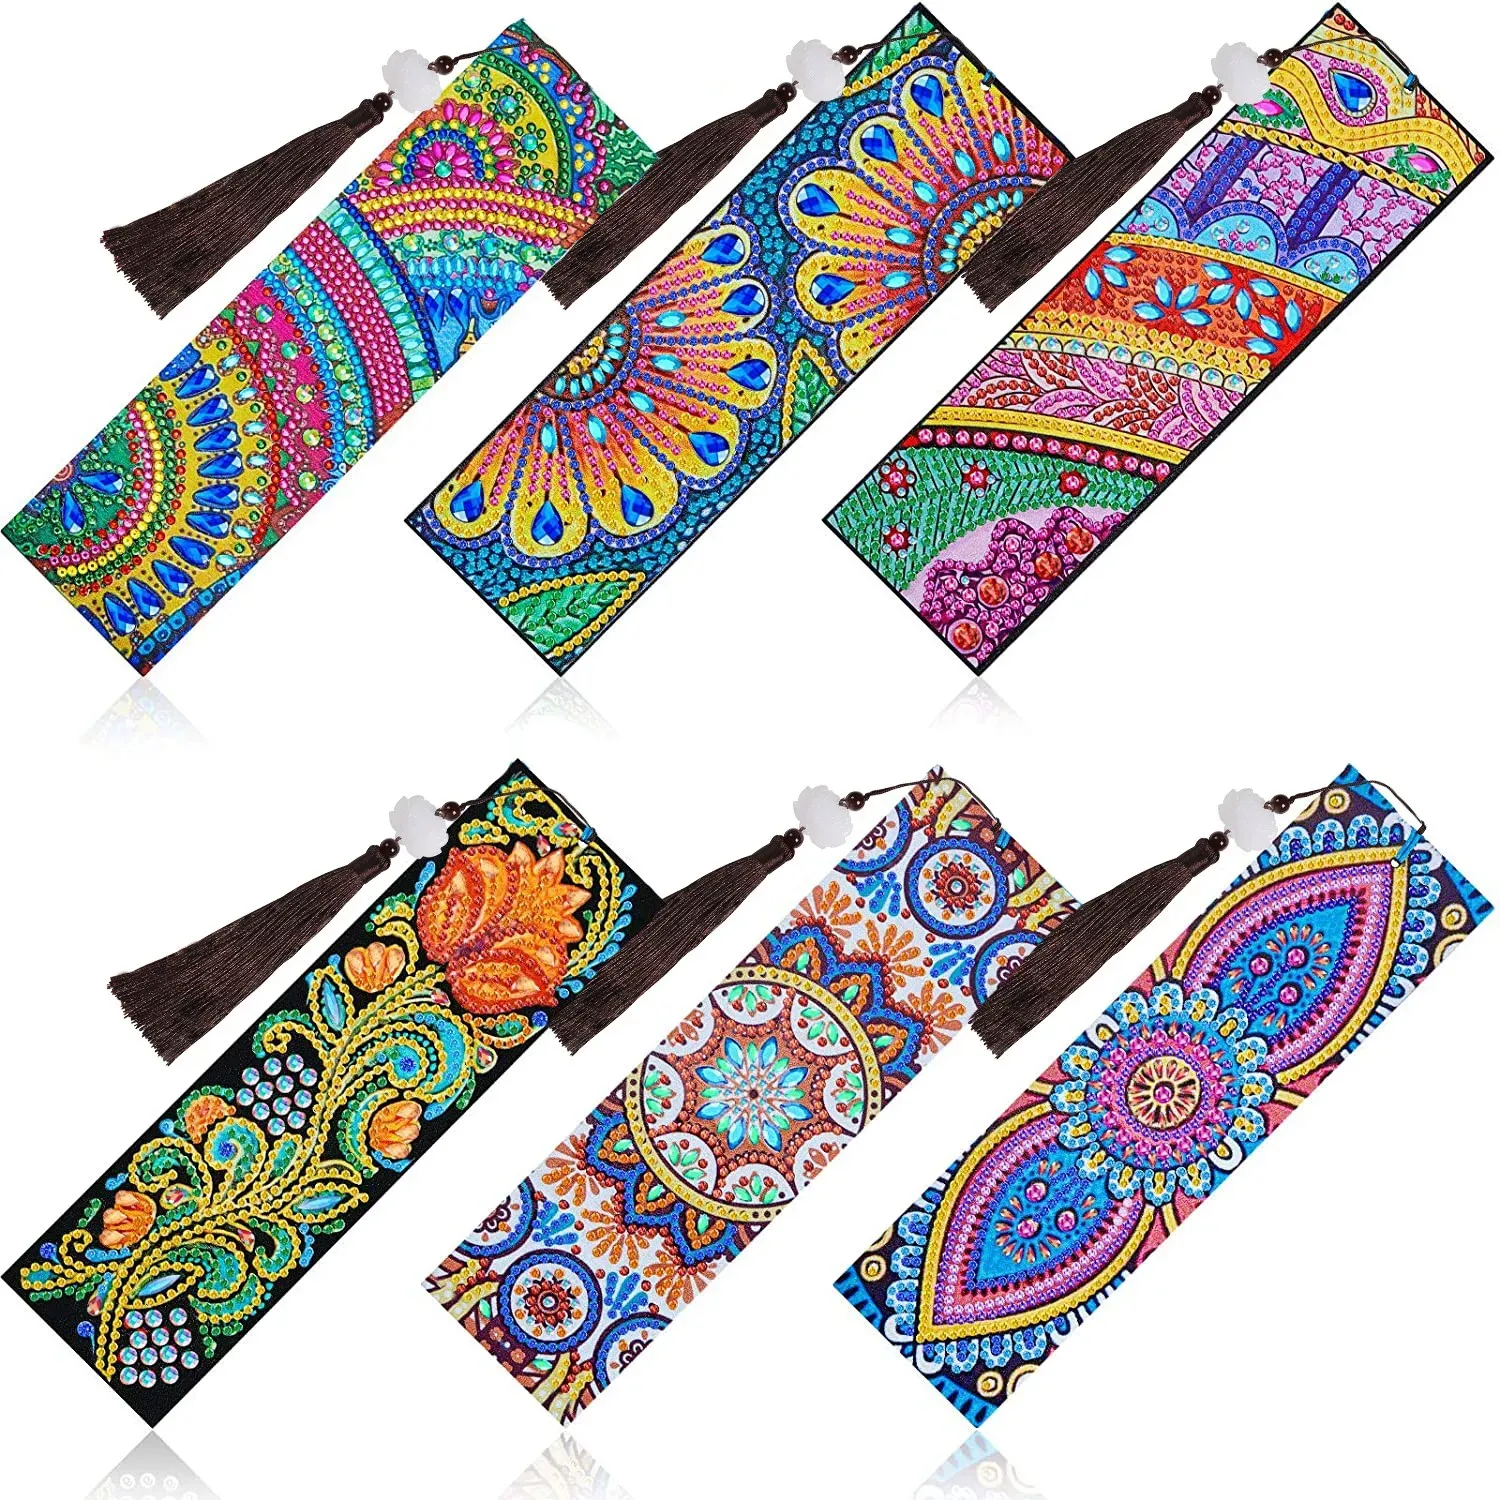 Curtains 28pcs Diy Diamond Painting Mandala Bookmark Special Shaped Drill Mosaic Leather Tassel Book Marks Craft Book Decoration Gifts